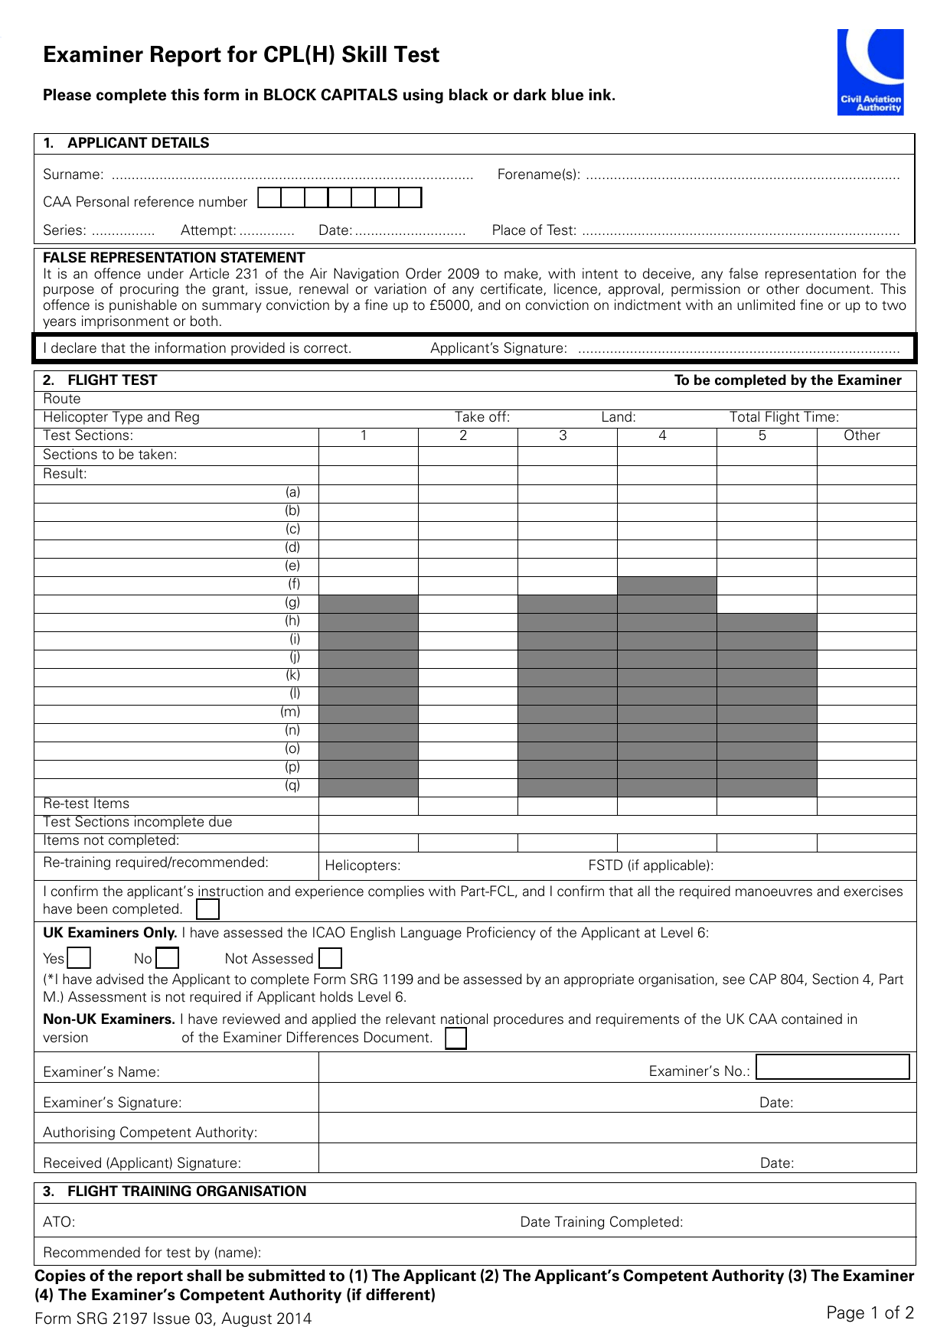 Form SRG2197 Examiner Report for Cpl(H) Skill Test - United Kingdom, Page 1